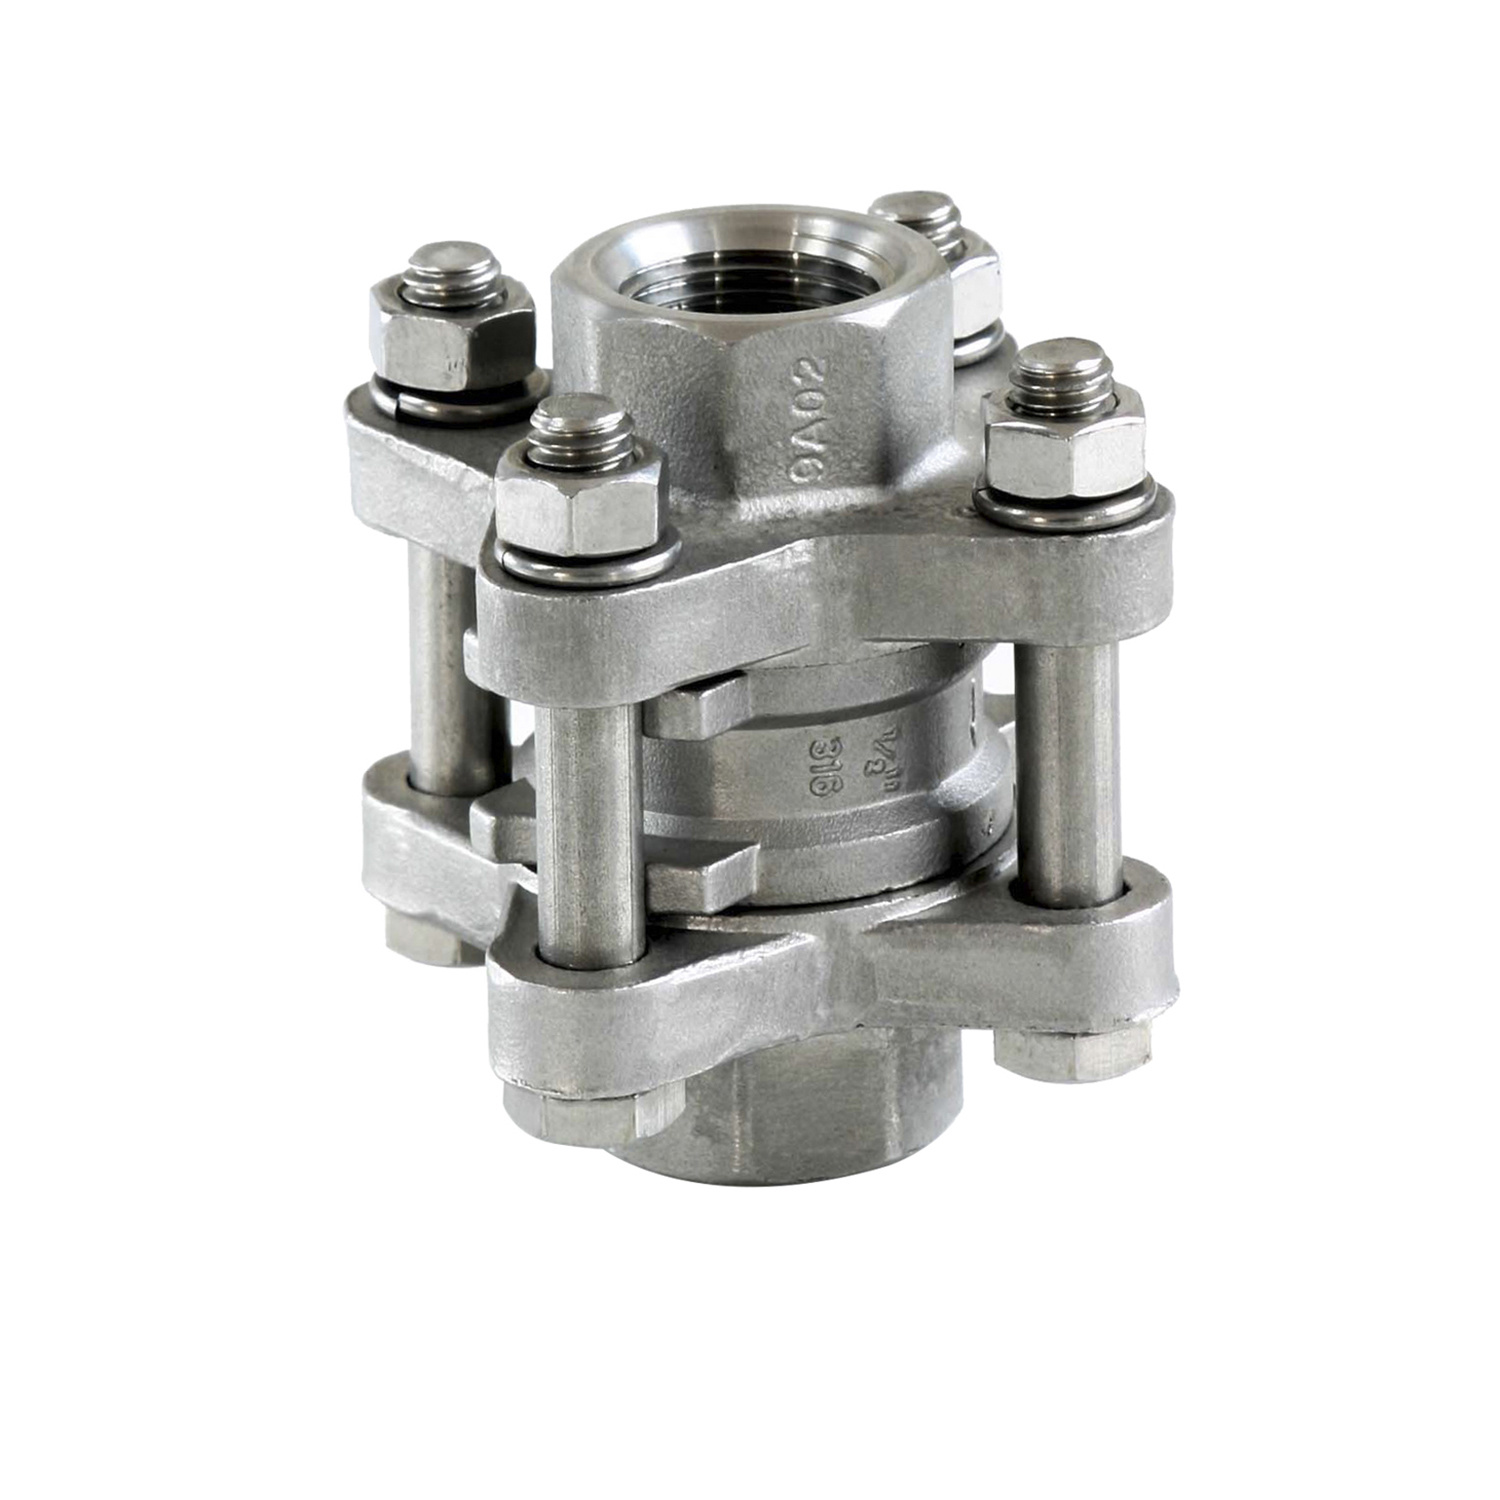 Various Standard Stainless Steel 3PC Ball Valve for Water and Oil